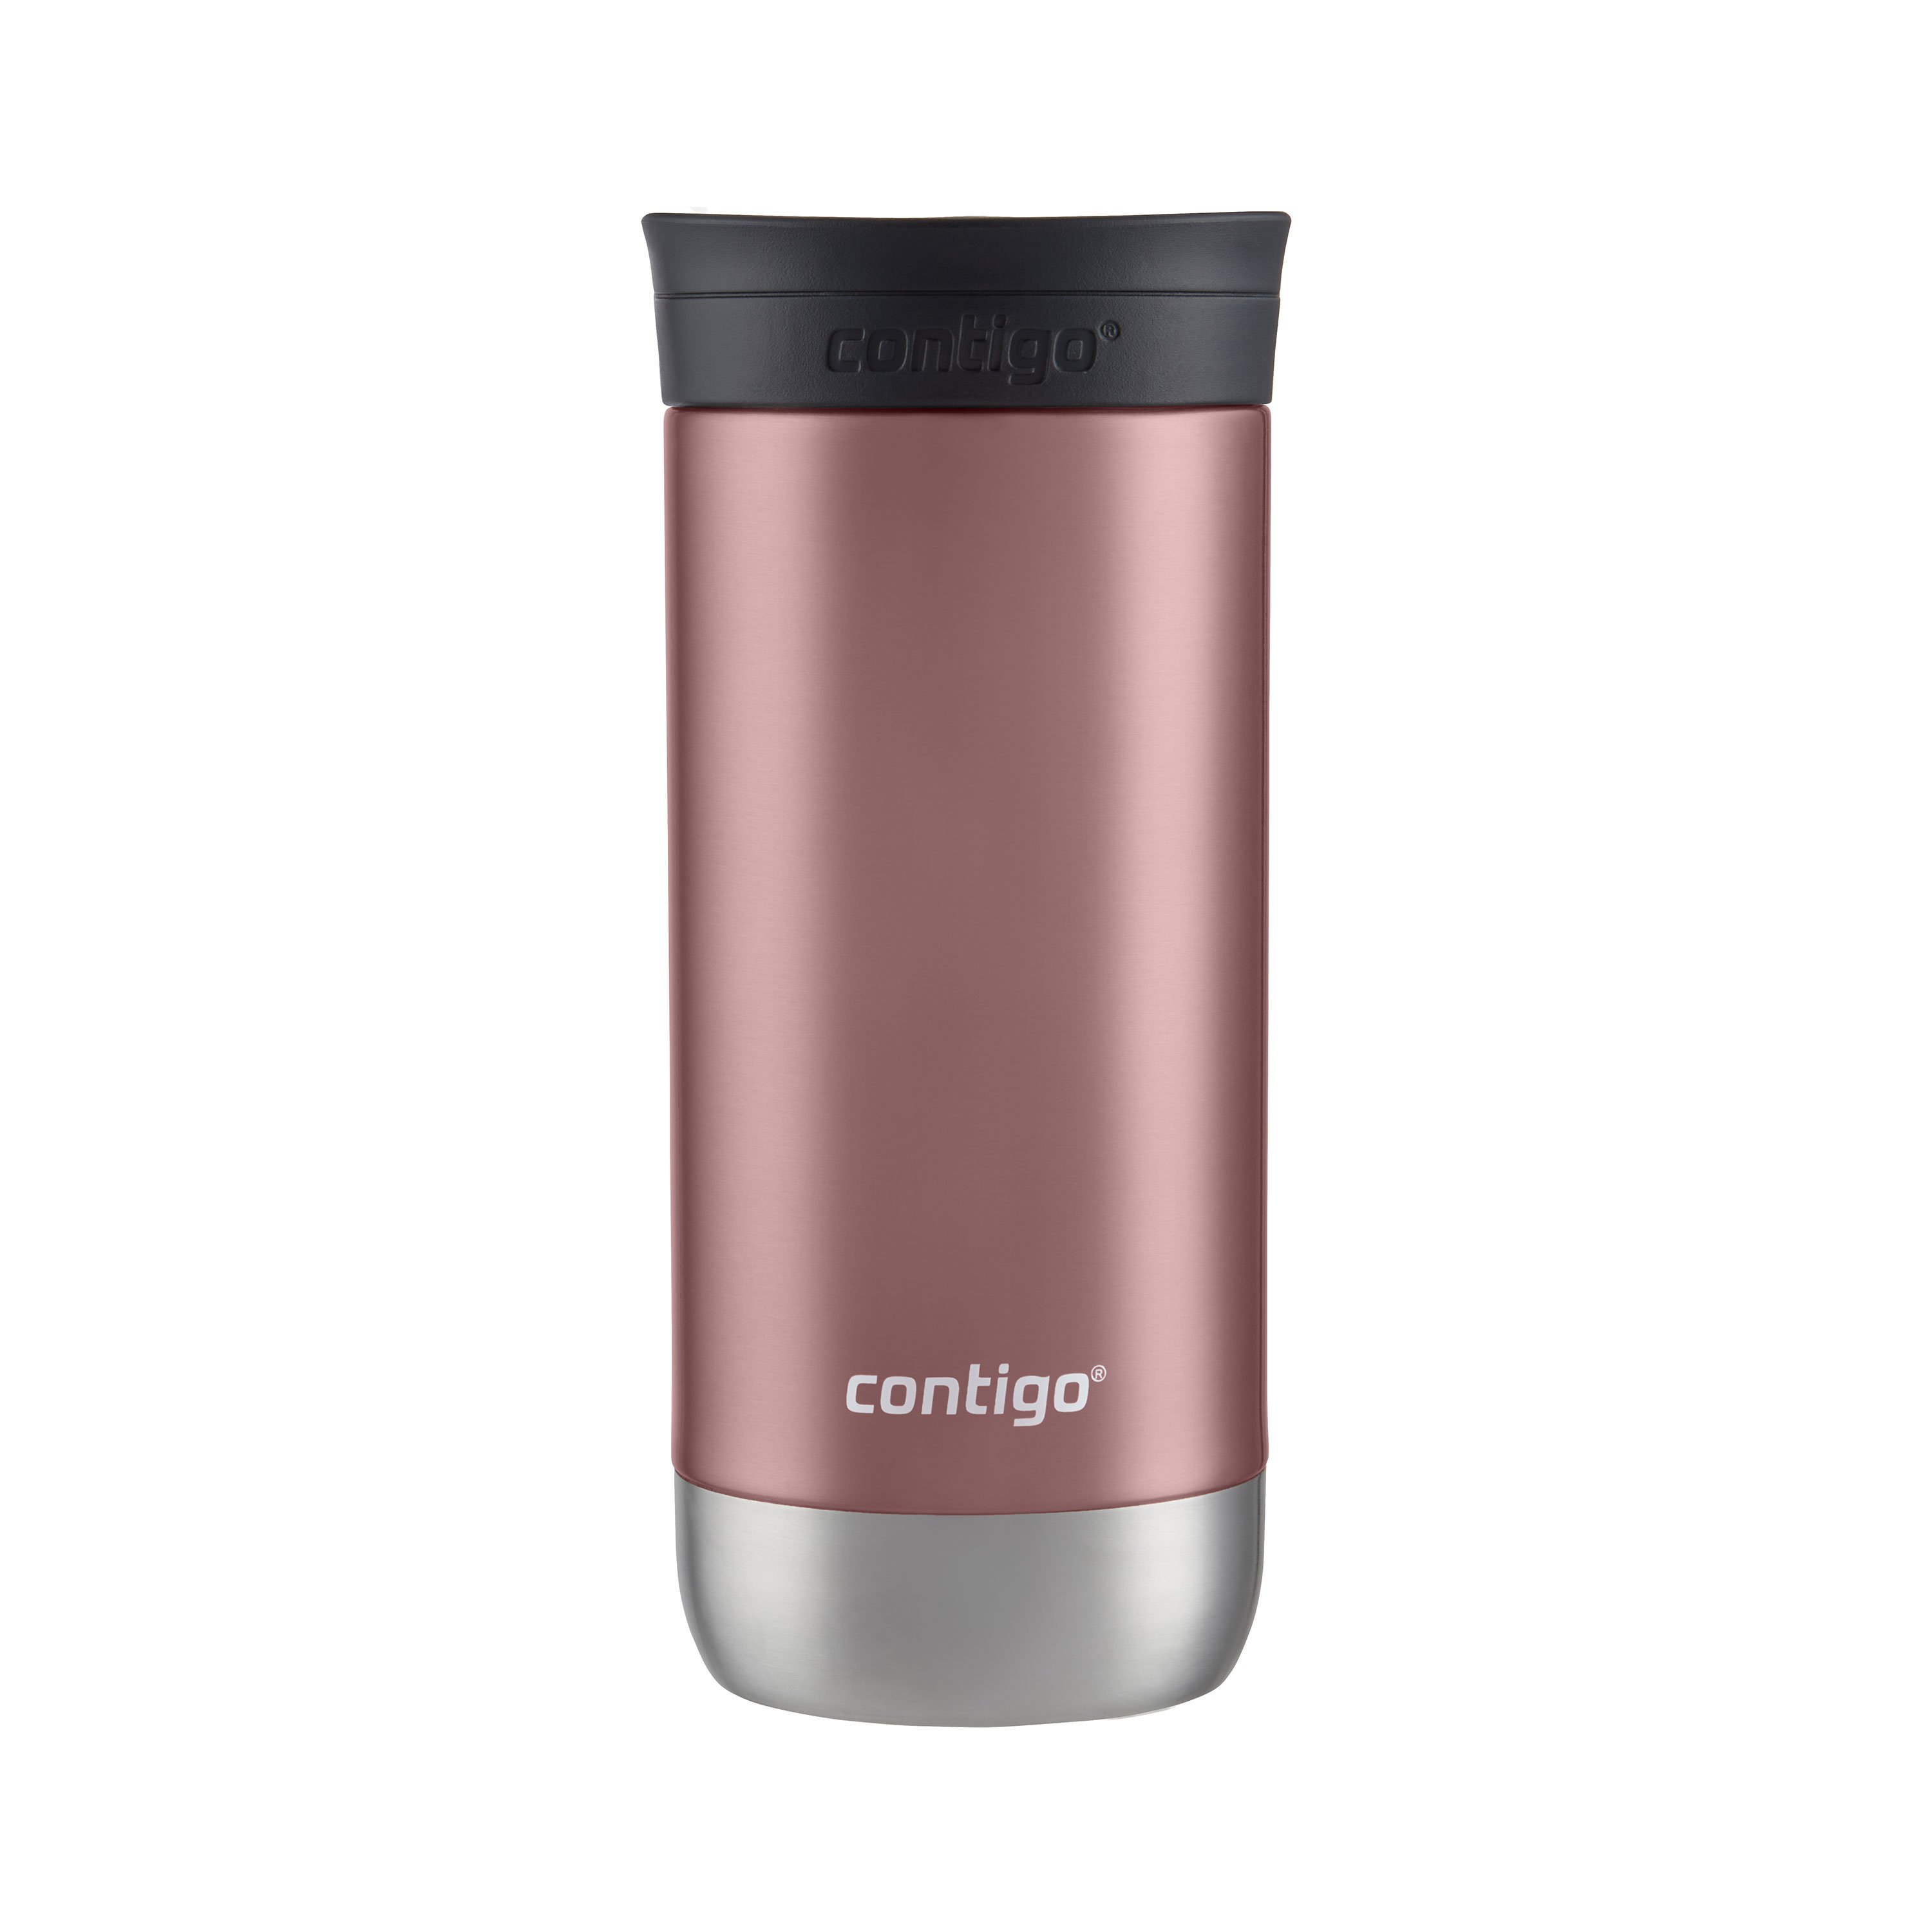 SNAPSEAL™ Insulated Stainless Steel Travel Mug, 16 oz